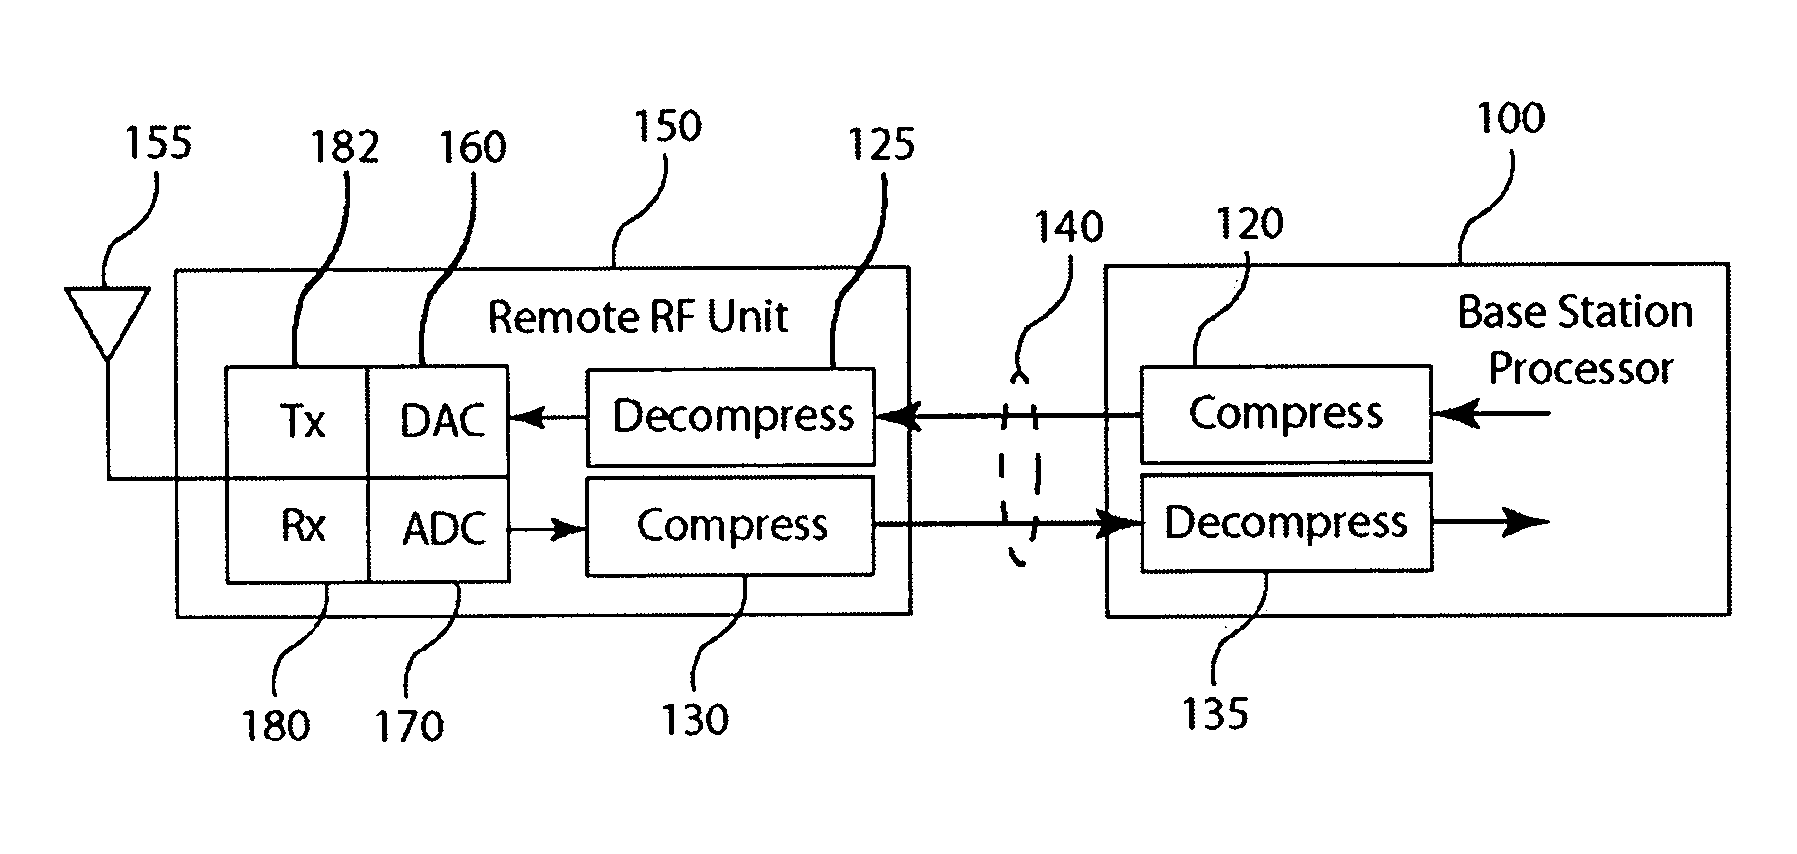 Compression of baseband signals in base transceiver systems